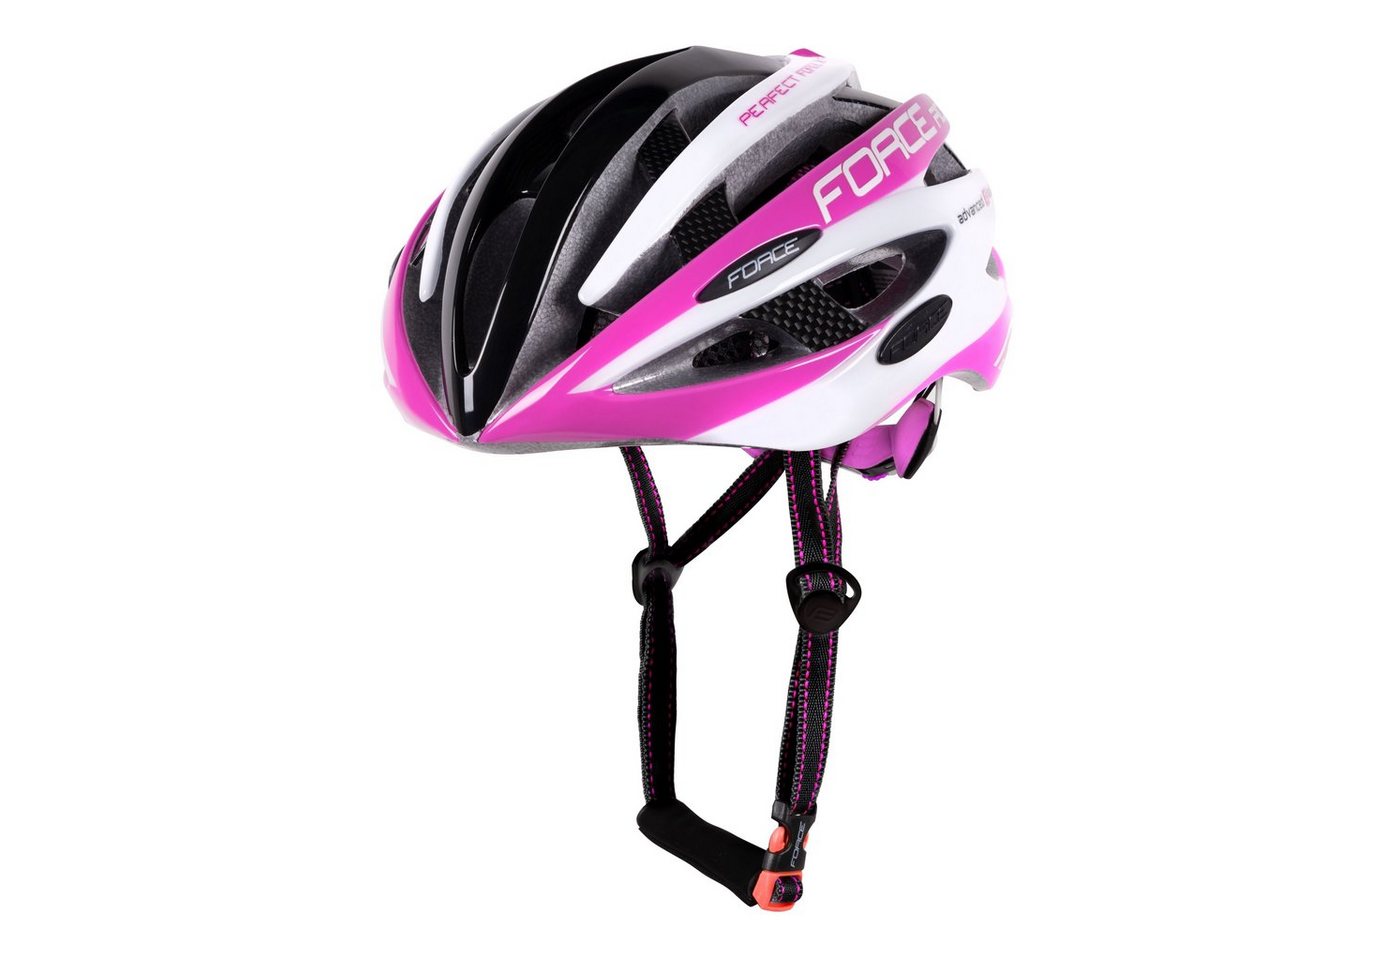 FORCE Fahrradhelm Helm FORCE ROAD pink-white- black S - M von FORCE